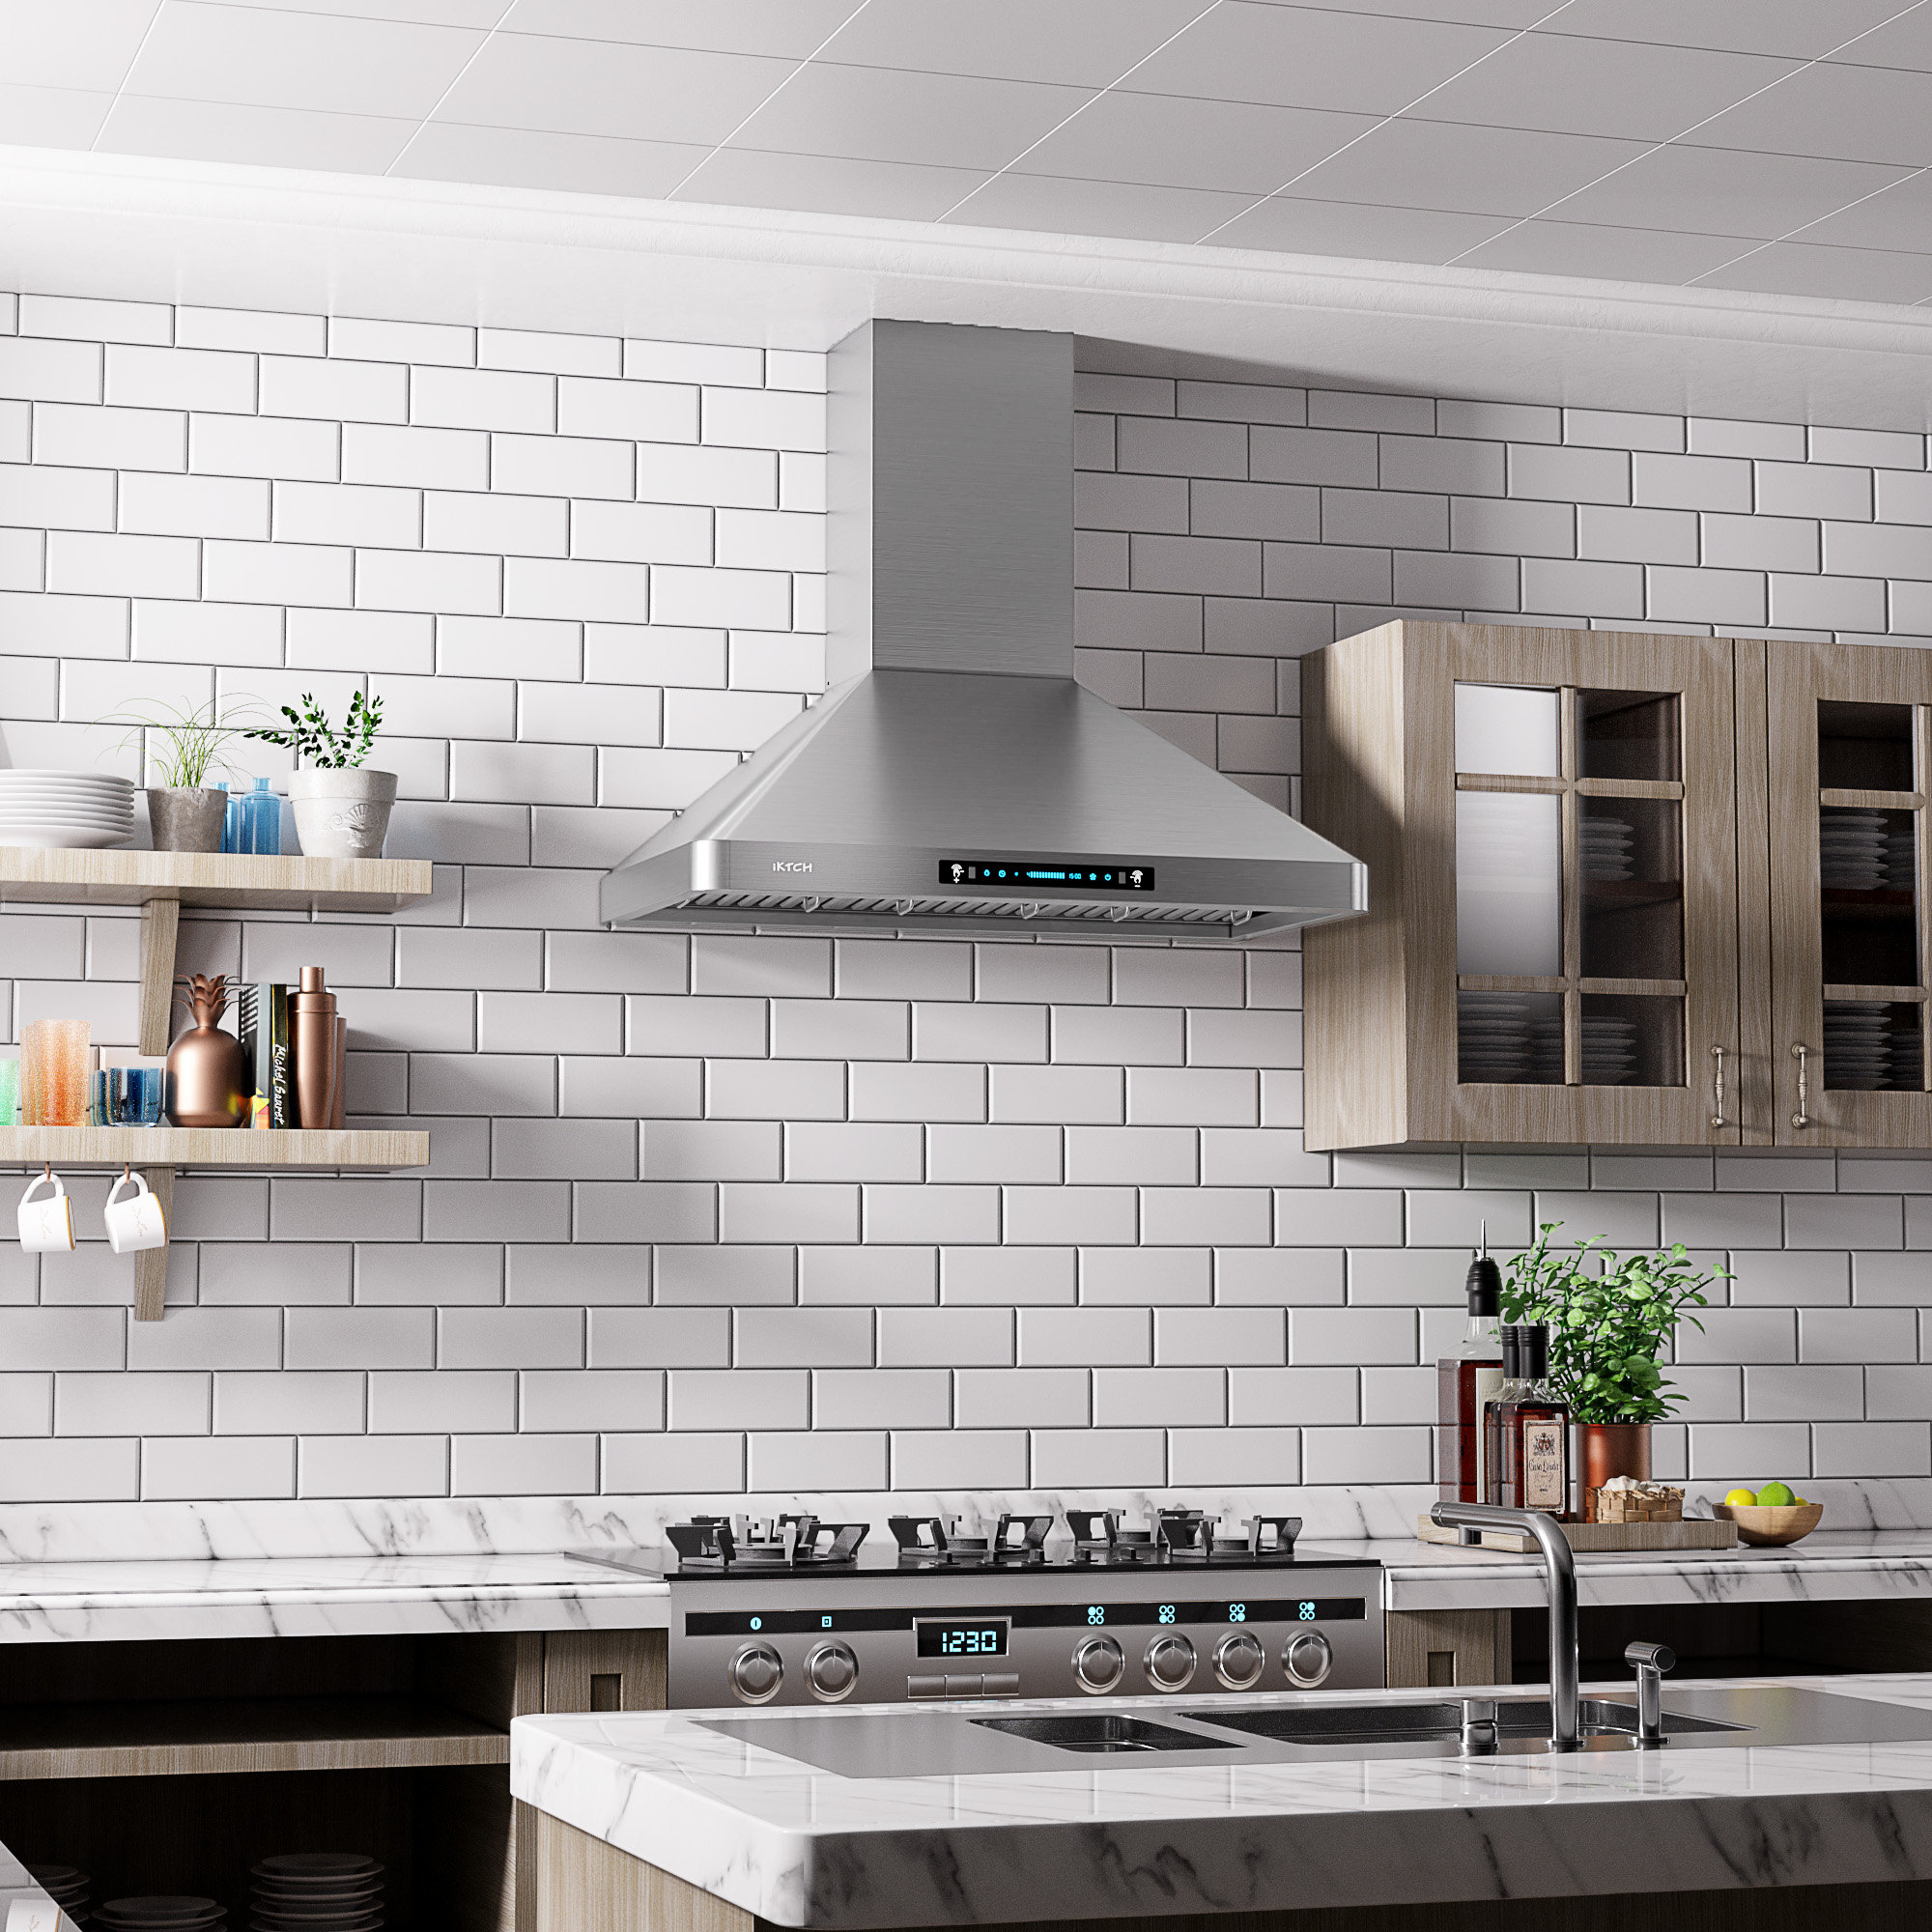 iKTCH 30-in 900-CFM Ducted Stainless Steel Wall-Mounted Range Hood with  Charcoal Filter in the Wall-Mounted Range Hoods department at